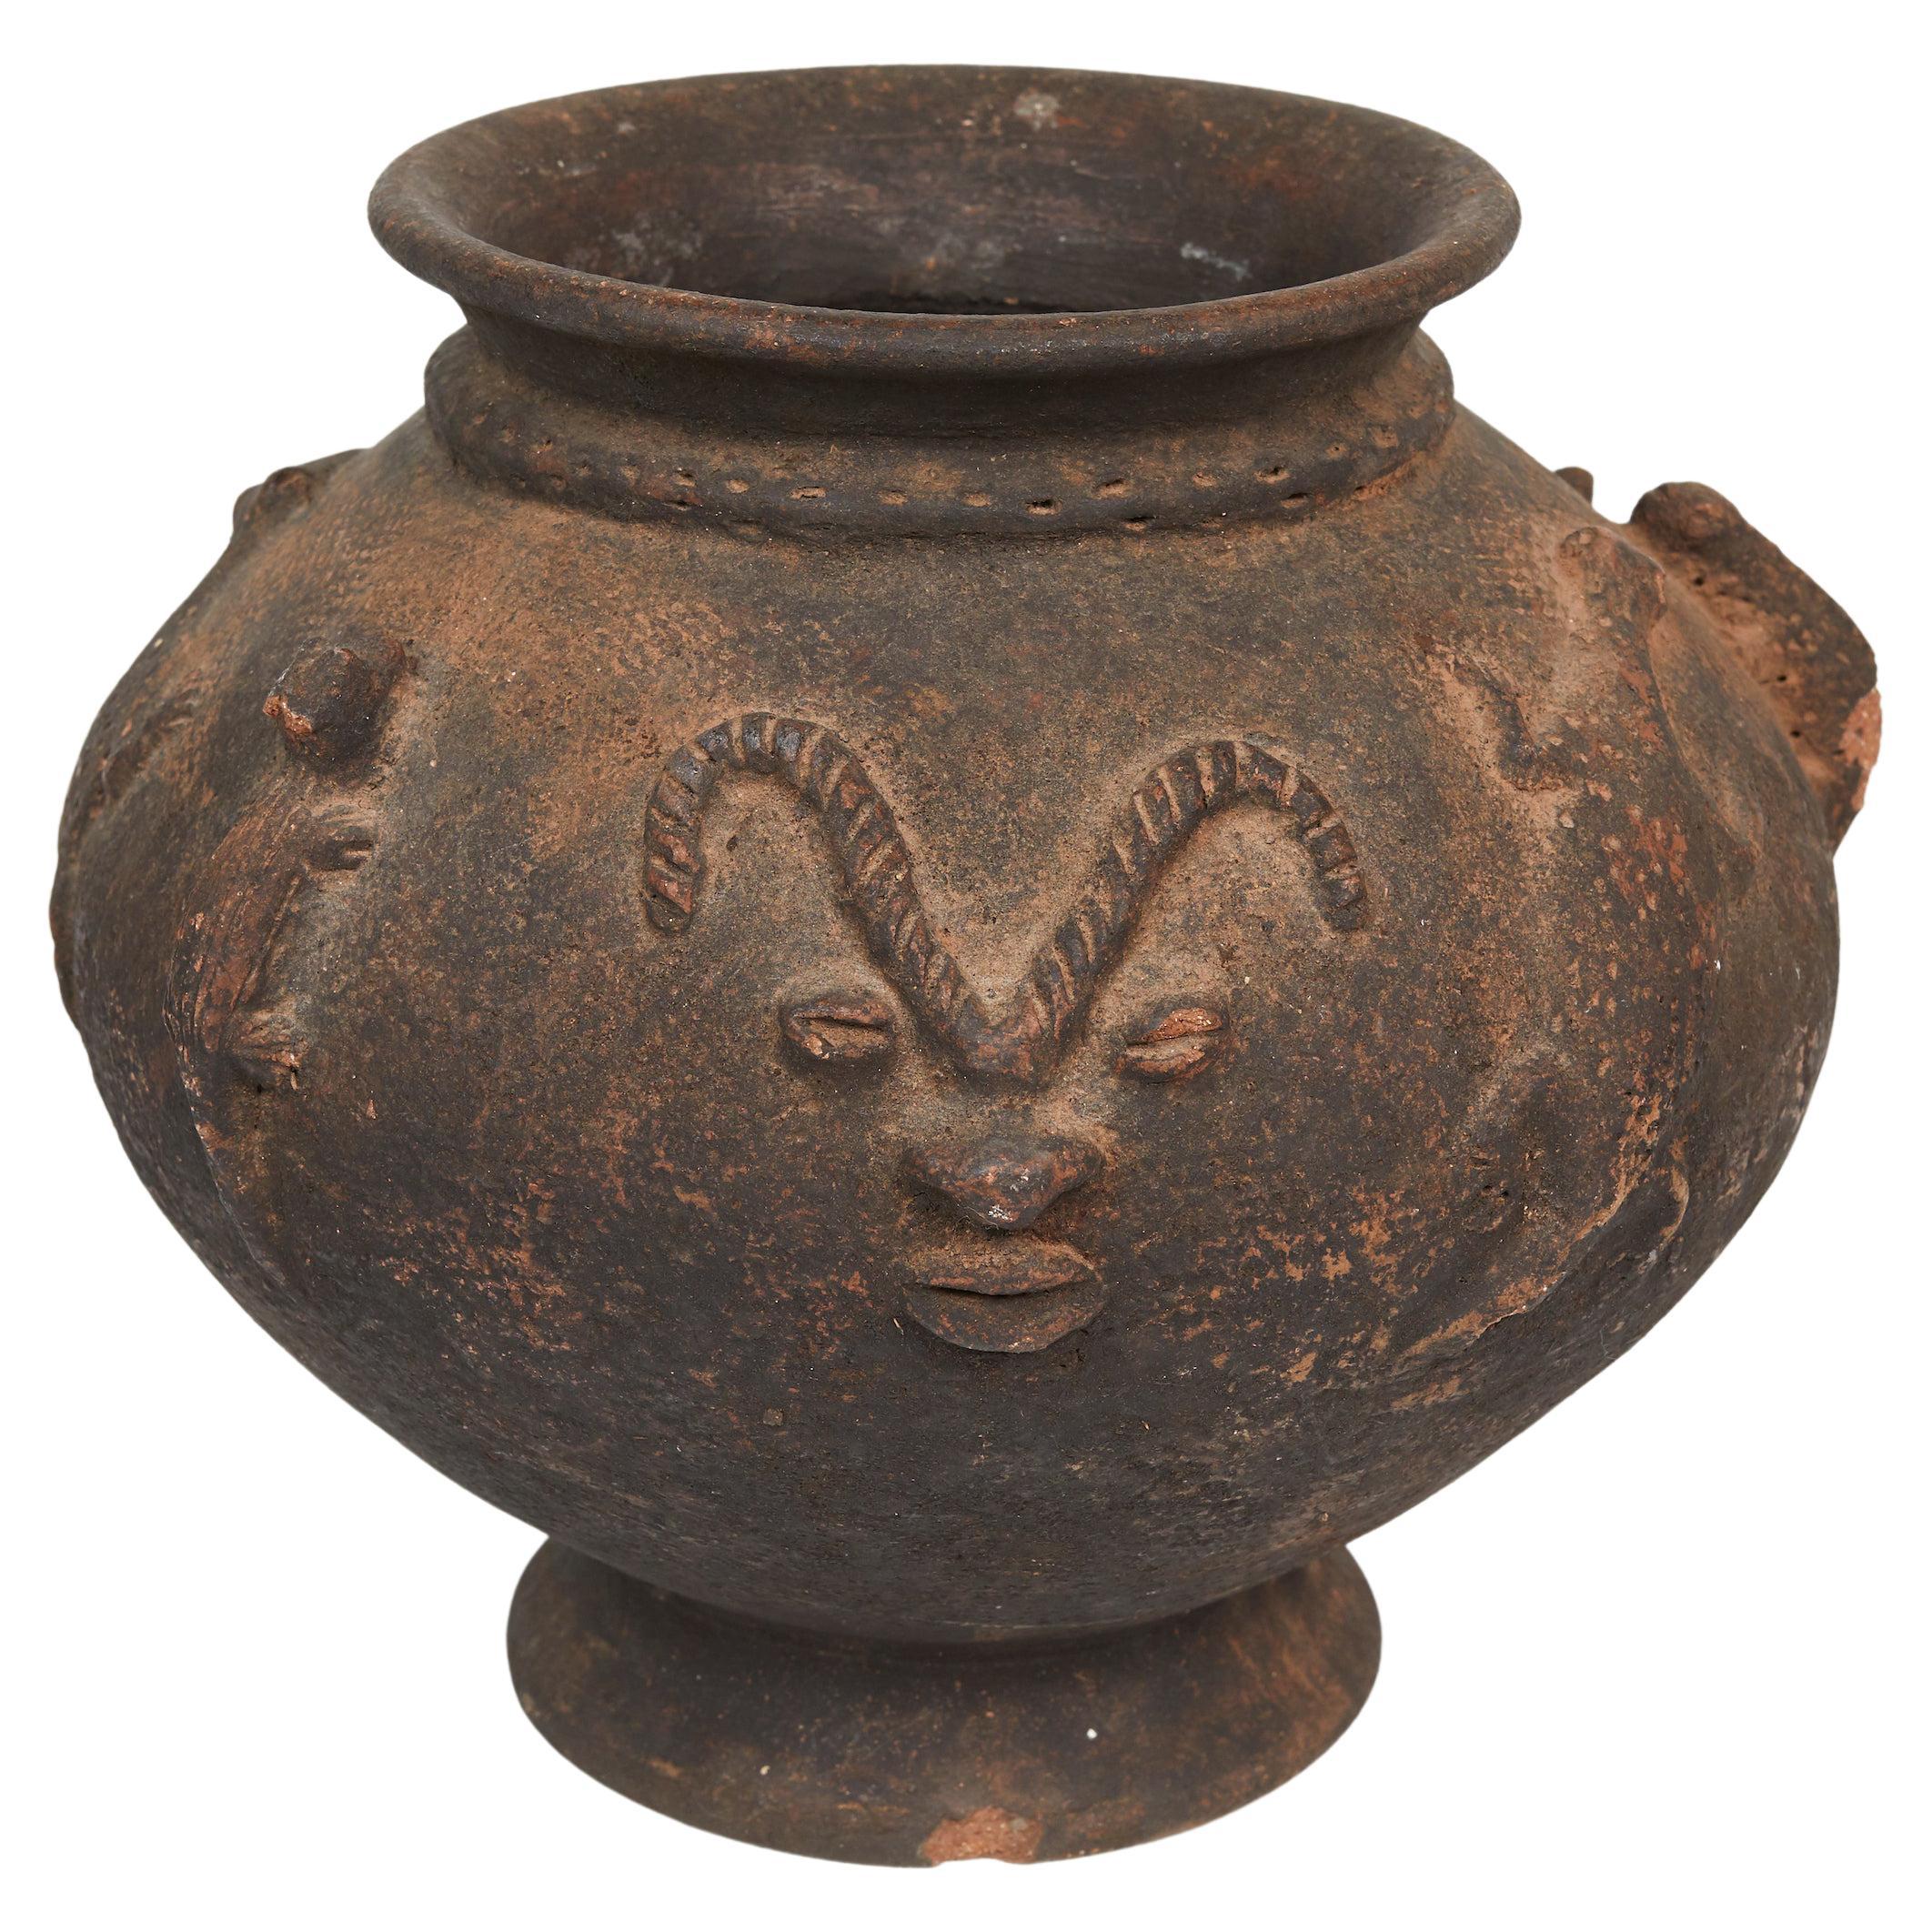 Dogon terra cotta vase decorated in relief with Lizards and human face with nice patina.